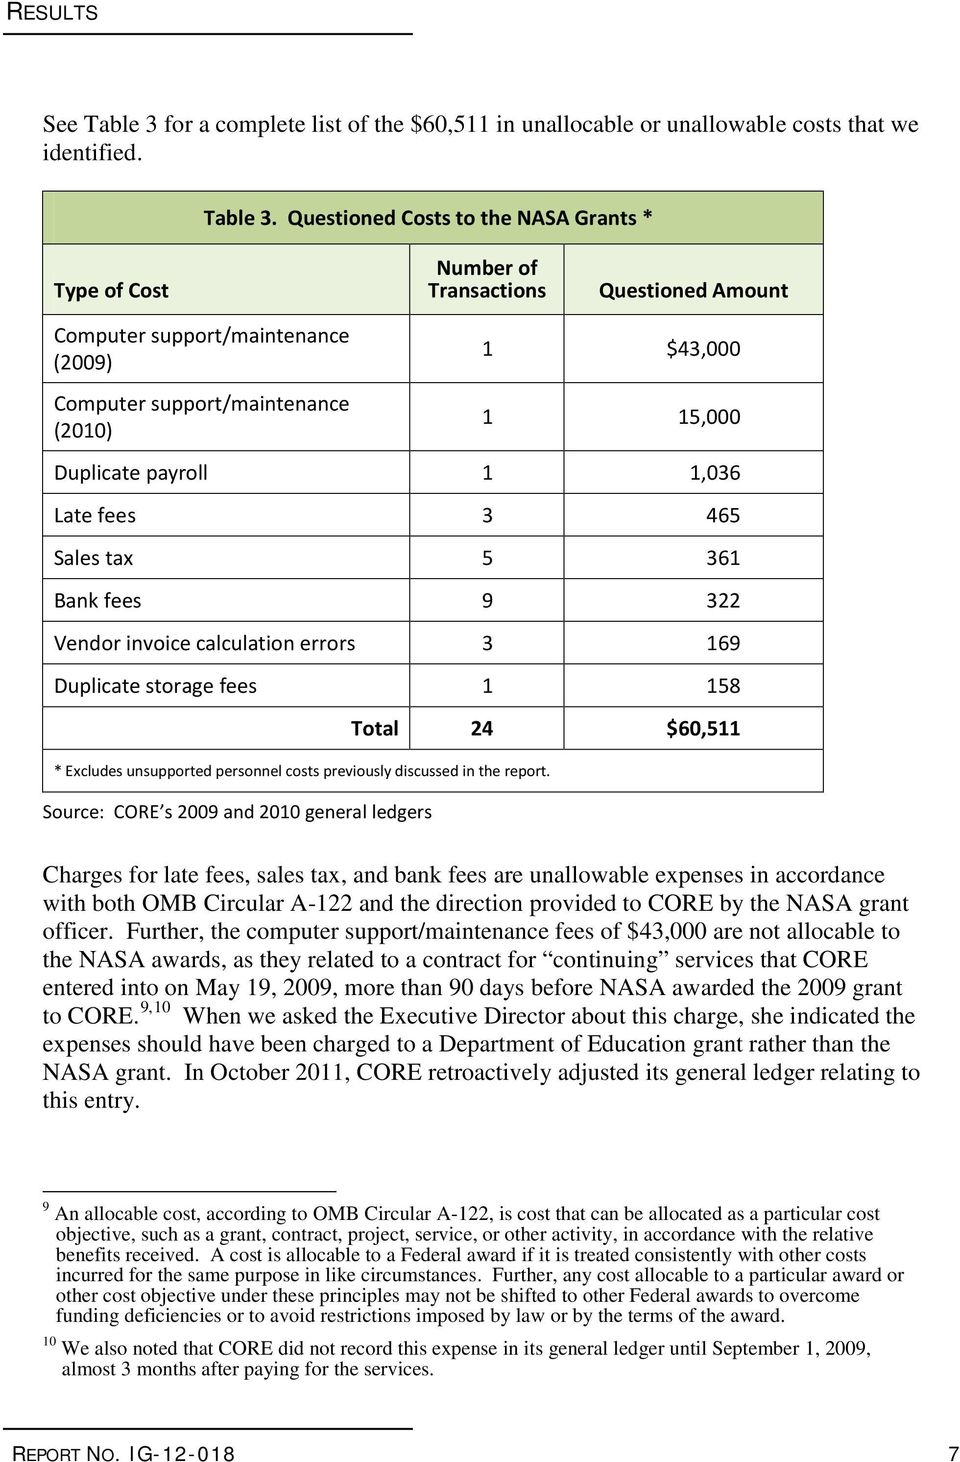 Questioned Costs to the NASA Grants * Type of Cost Number of Transactions Questioned Amount Computer support/maintenance (2009) Computer support/maintenance (2010) 1 $43,000 1 15,000 Duplicate